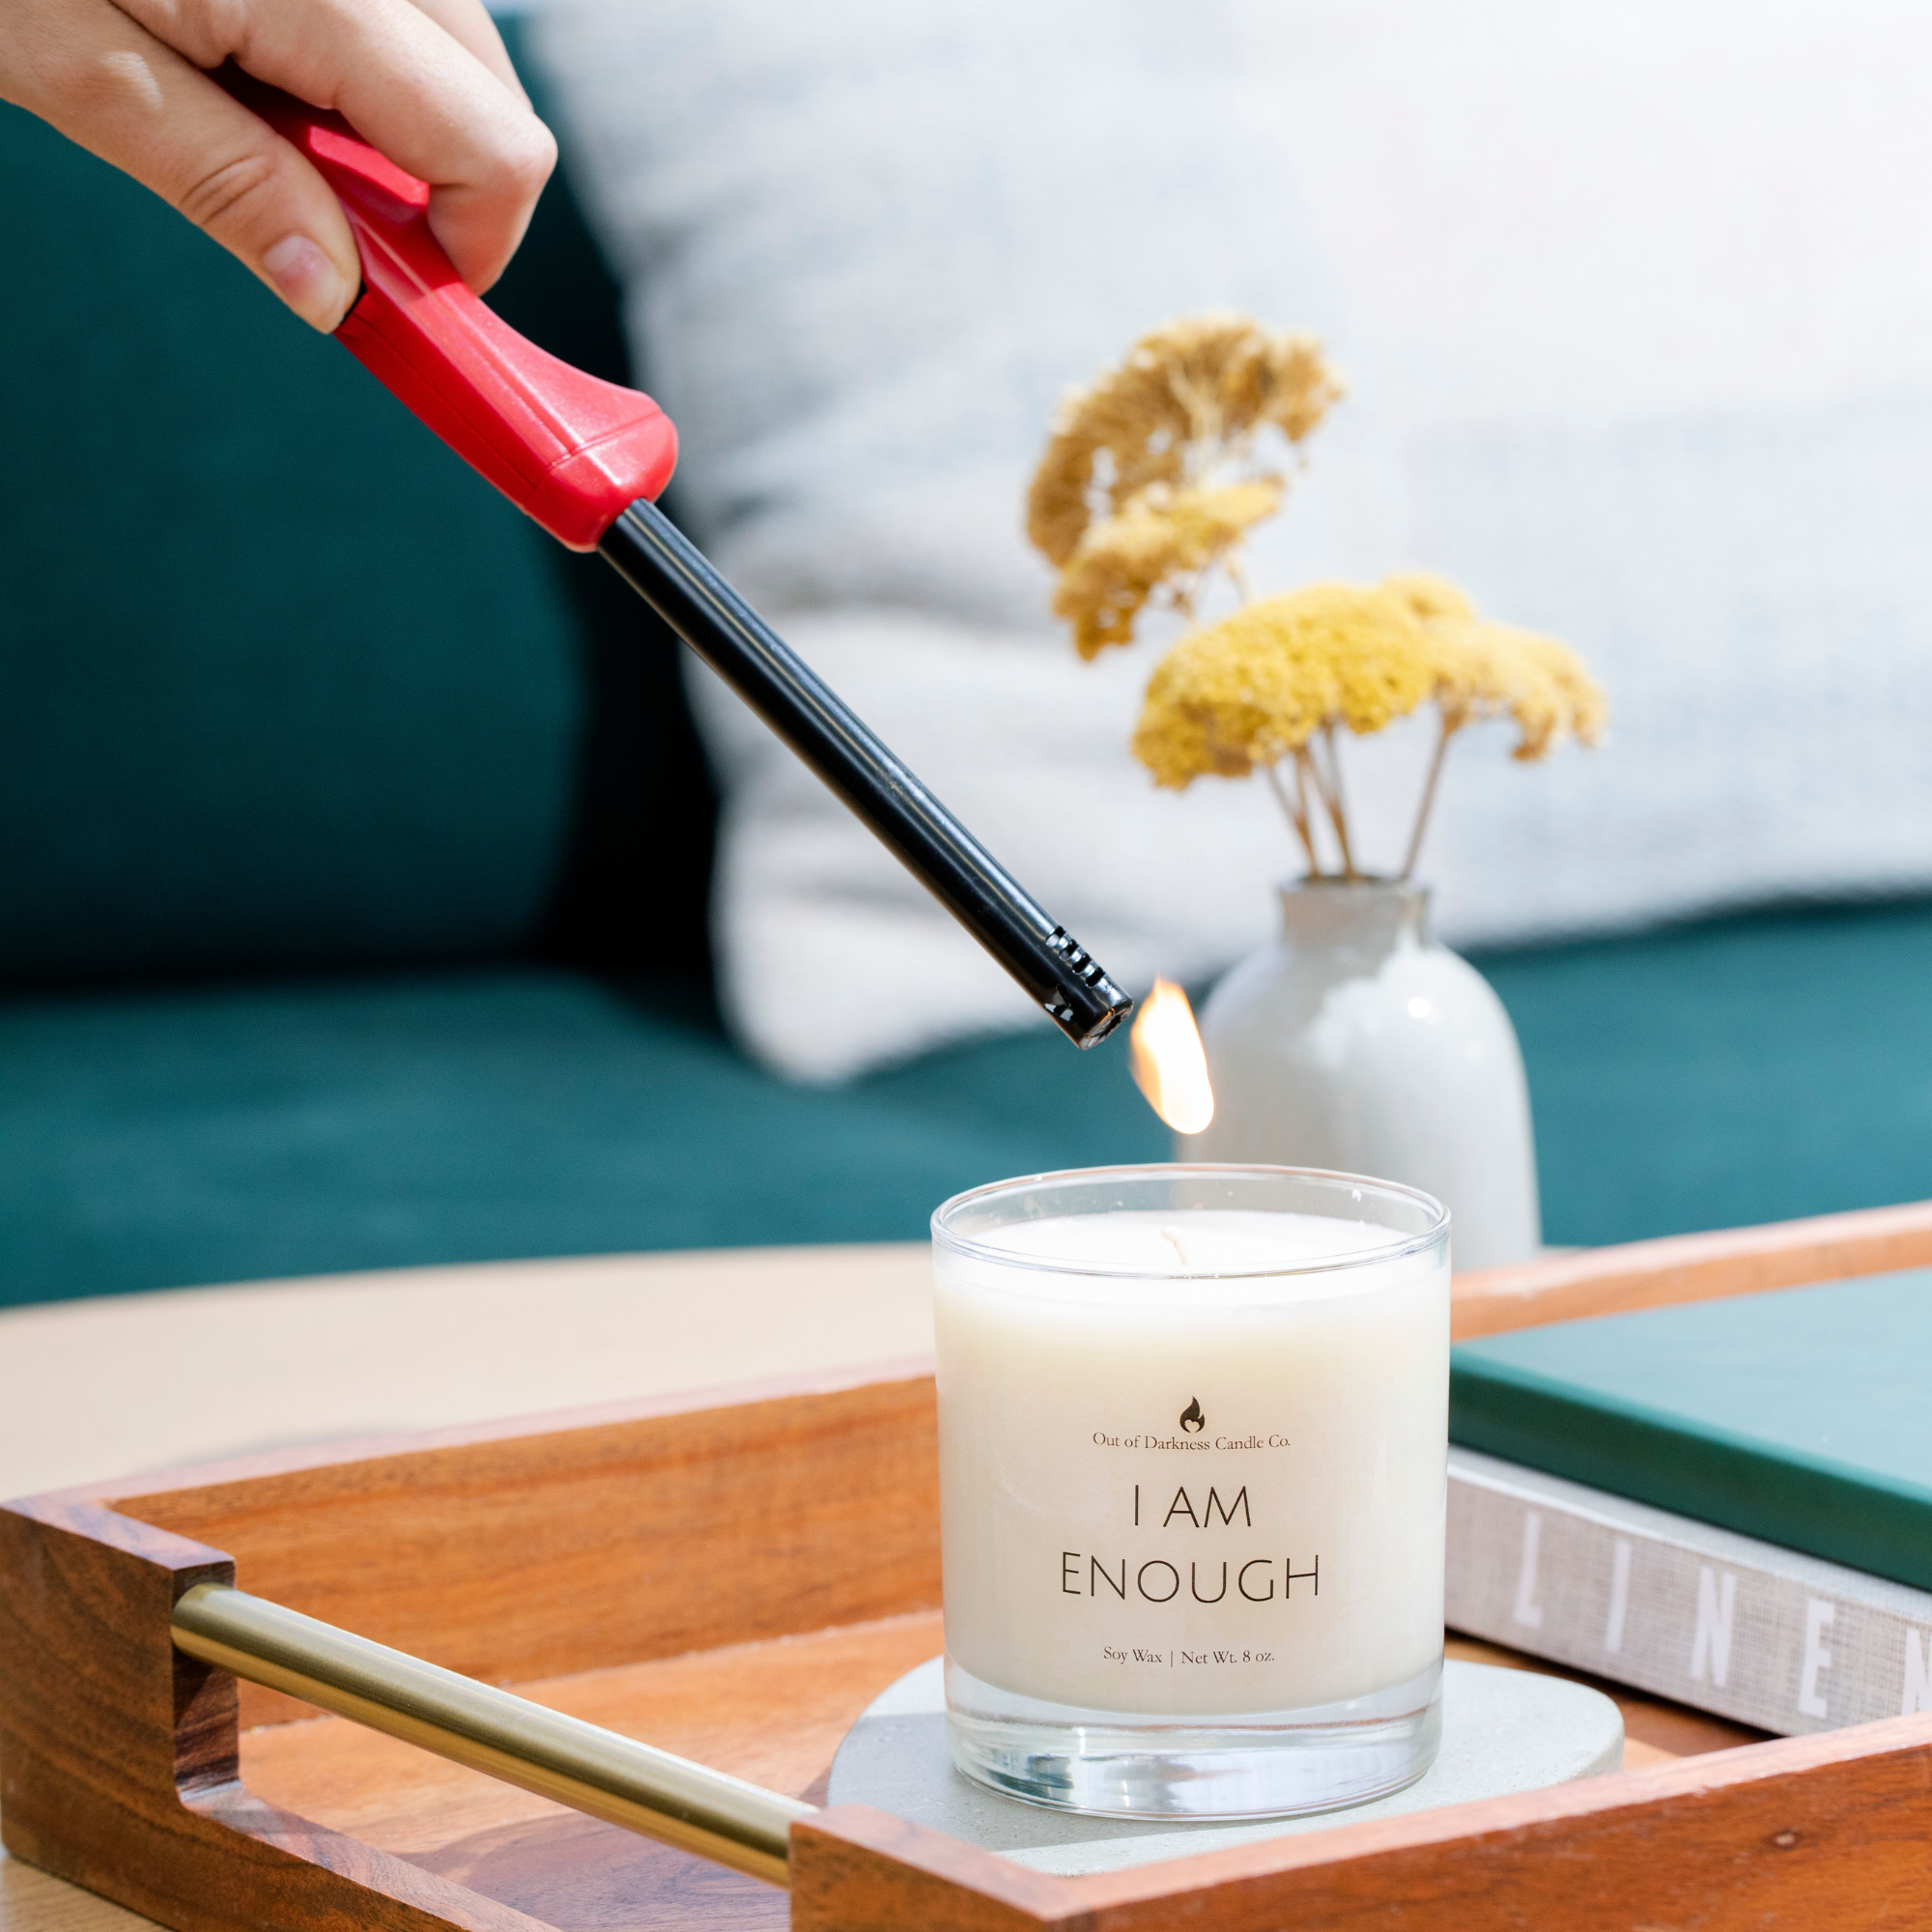 clear glass jar candle in a living room setting on a wooden tray with book and a flower behind it being lit with a lighter